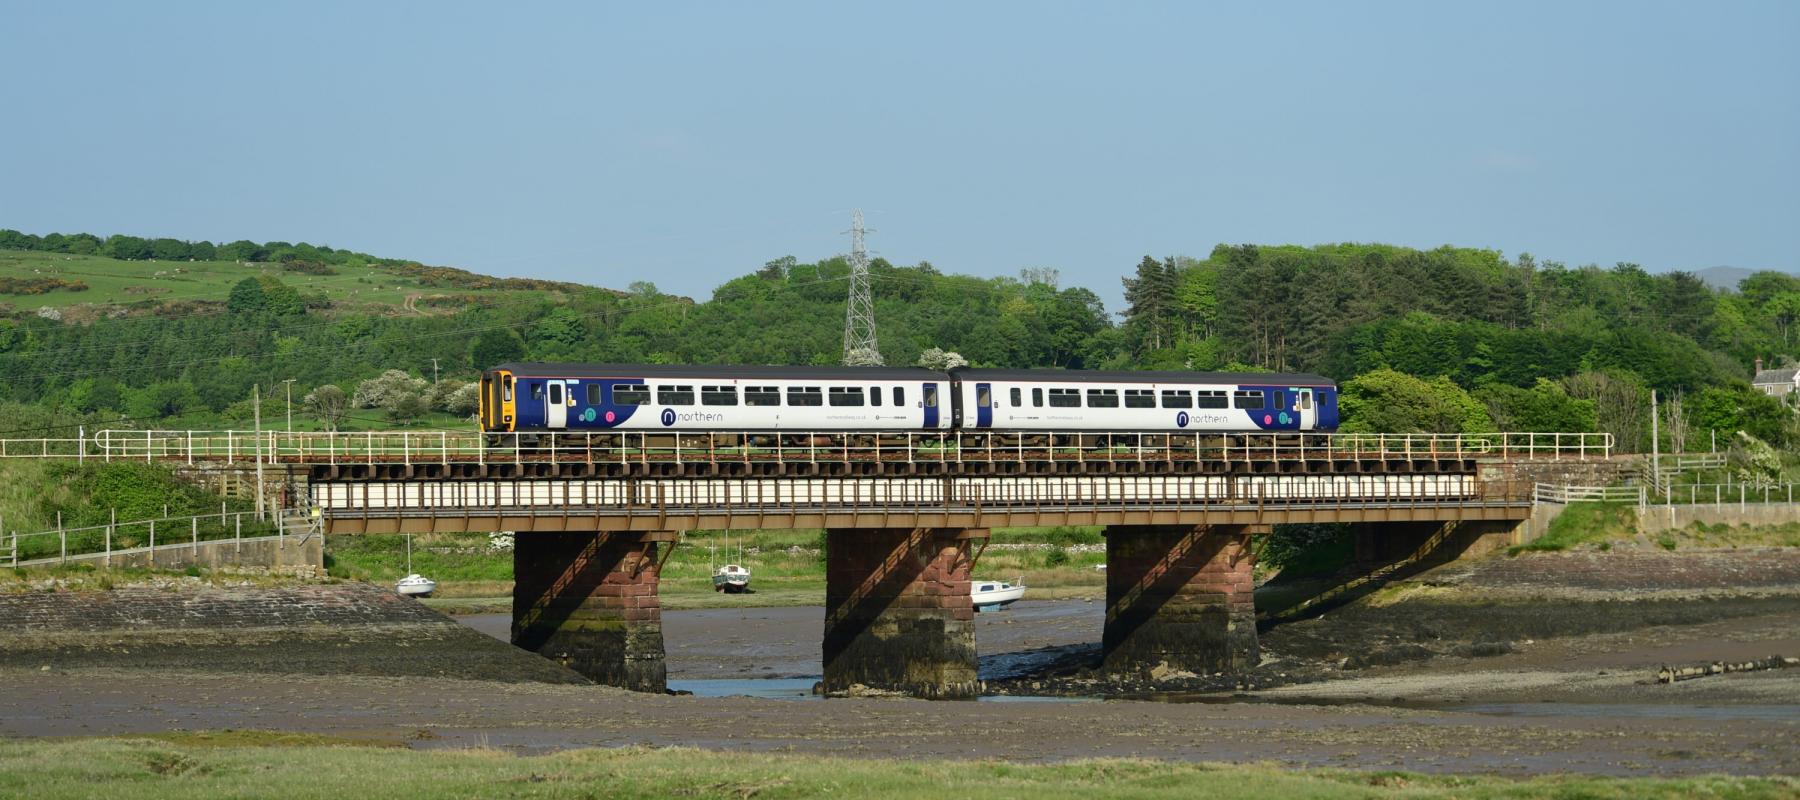 Northern train travelling along the Cumbrian Coast at Ravenglass